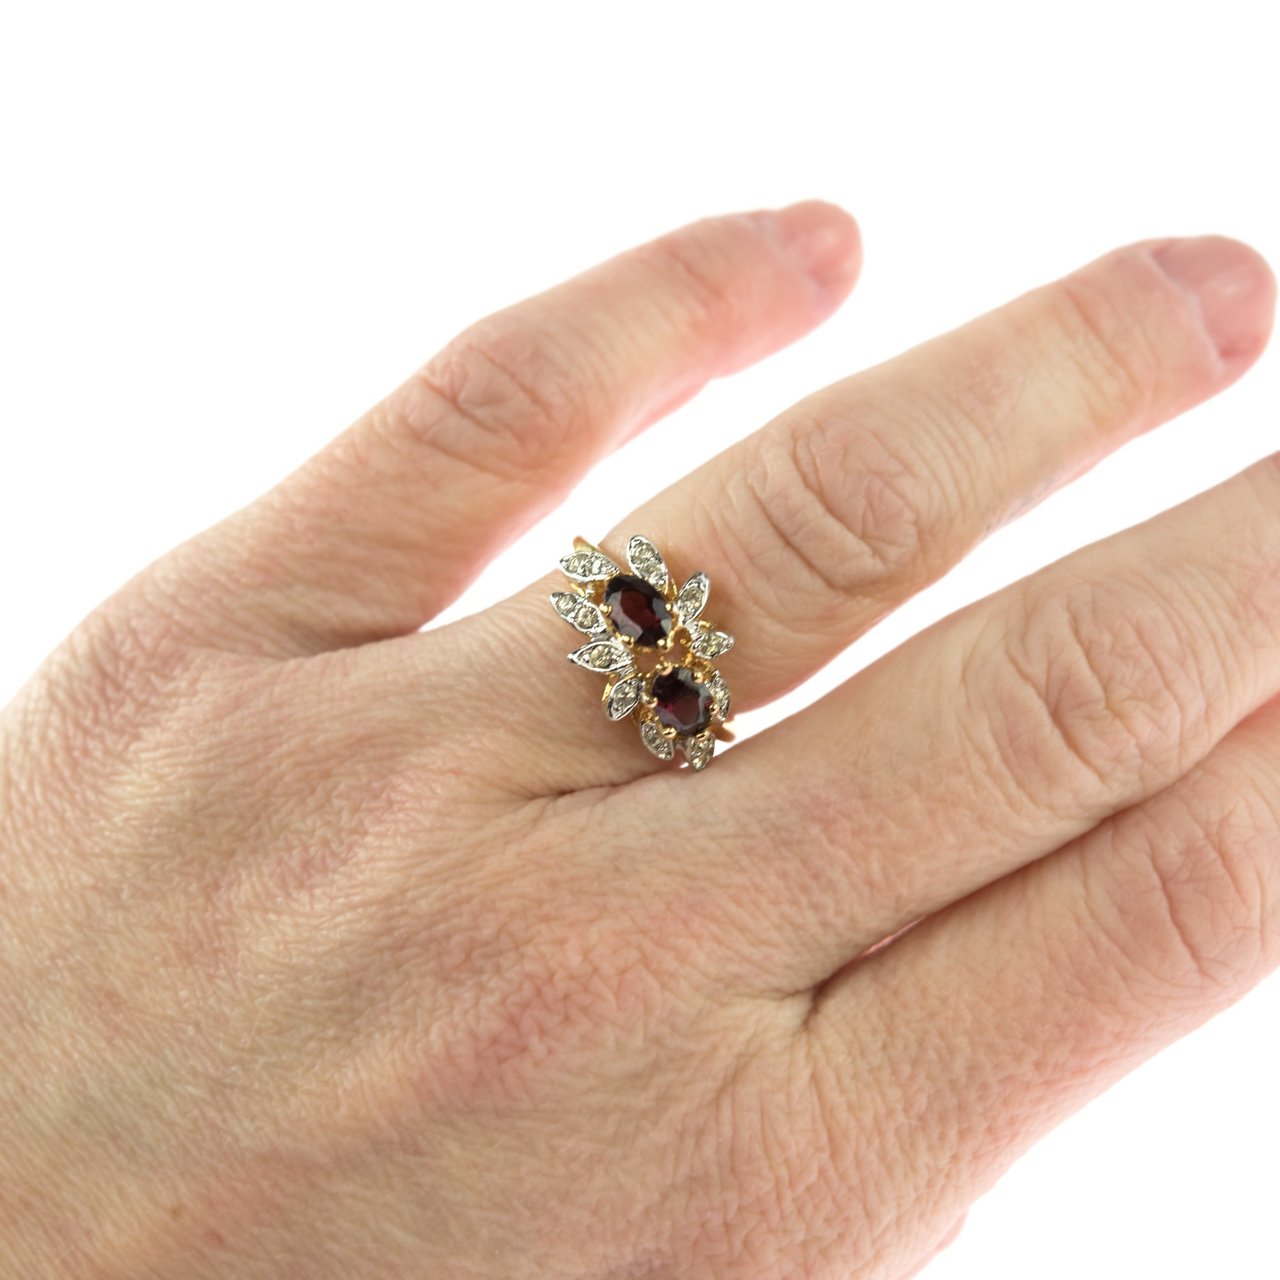 Vintage Ring Genuine Garnet and Clear Swarovski Crystals 18kt Gold Plated Band January Birthstone R1717 Size: 9